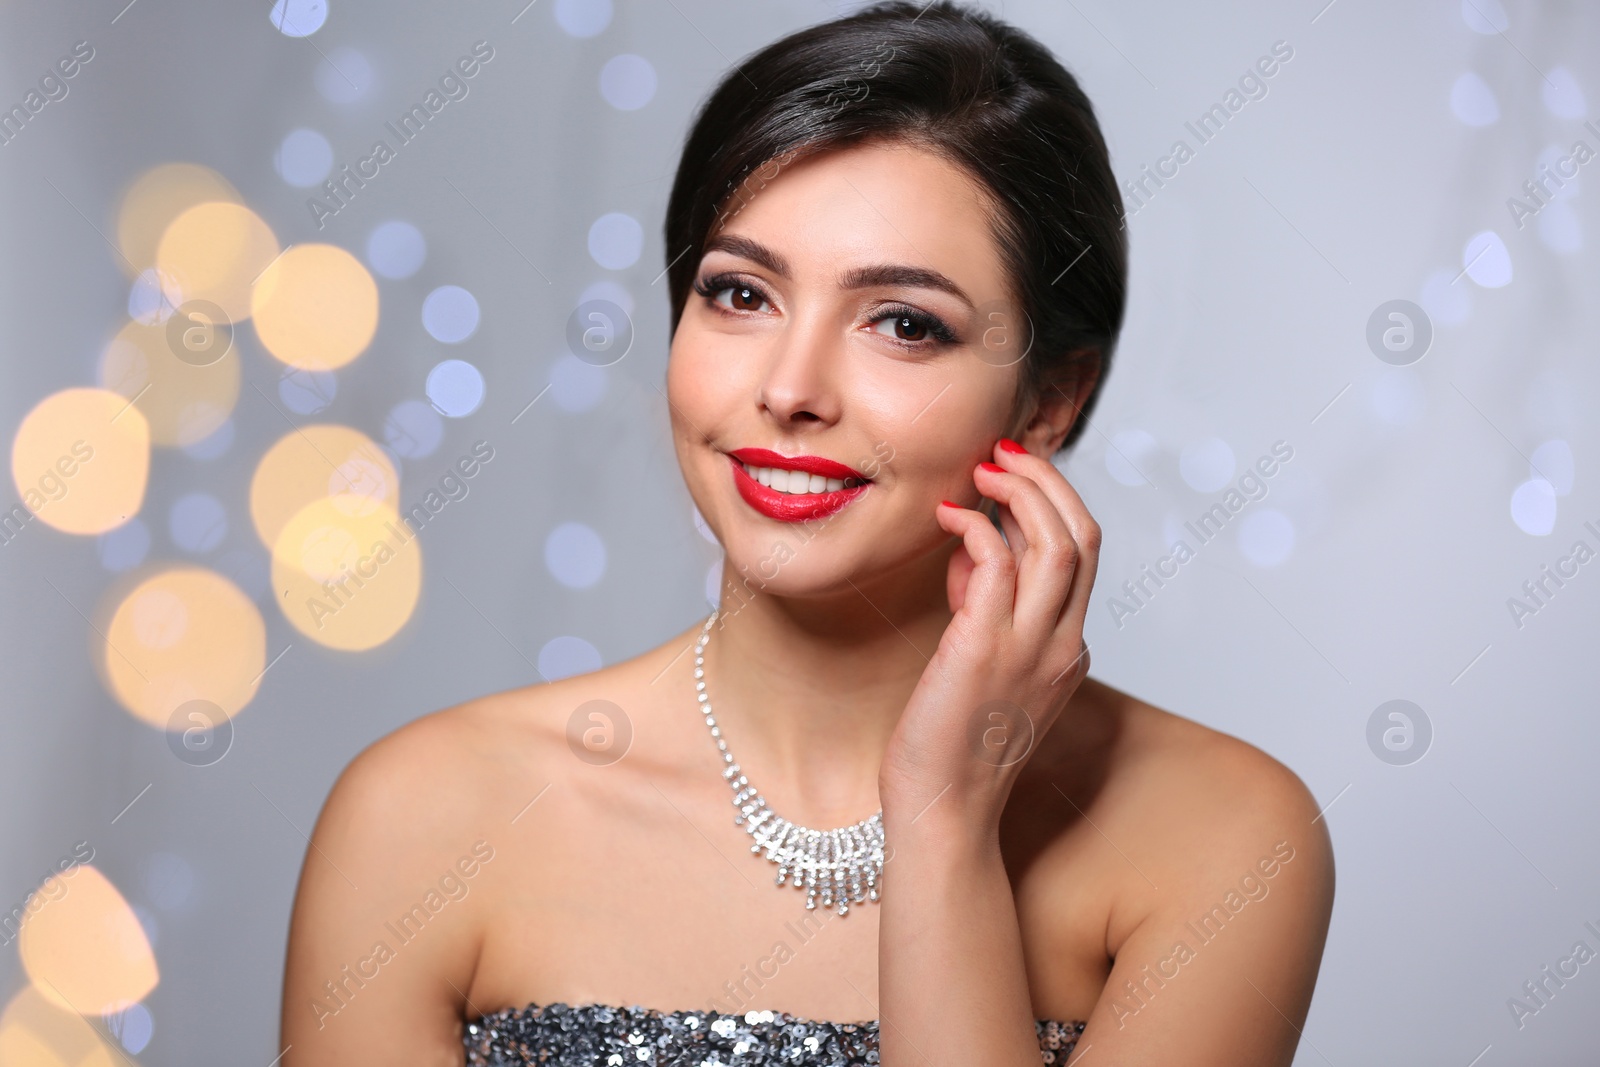 Photo of Beautiful woman with elegant jewelry on blurred background